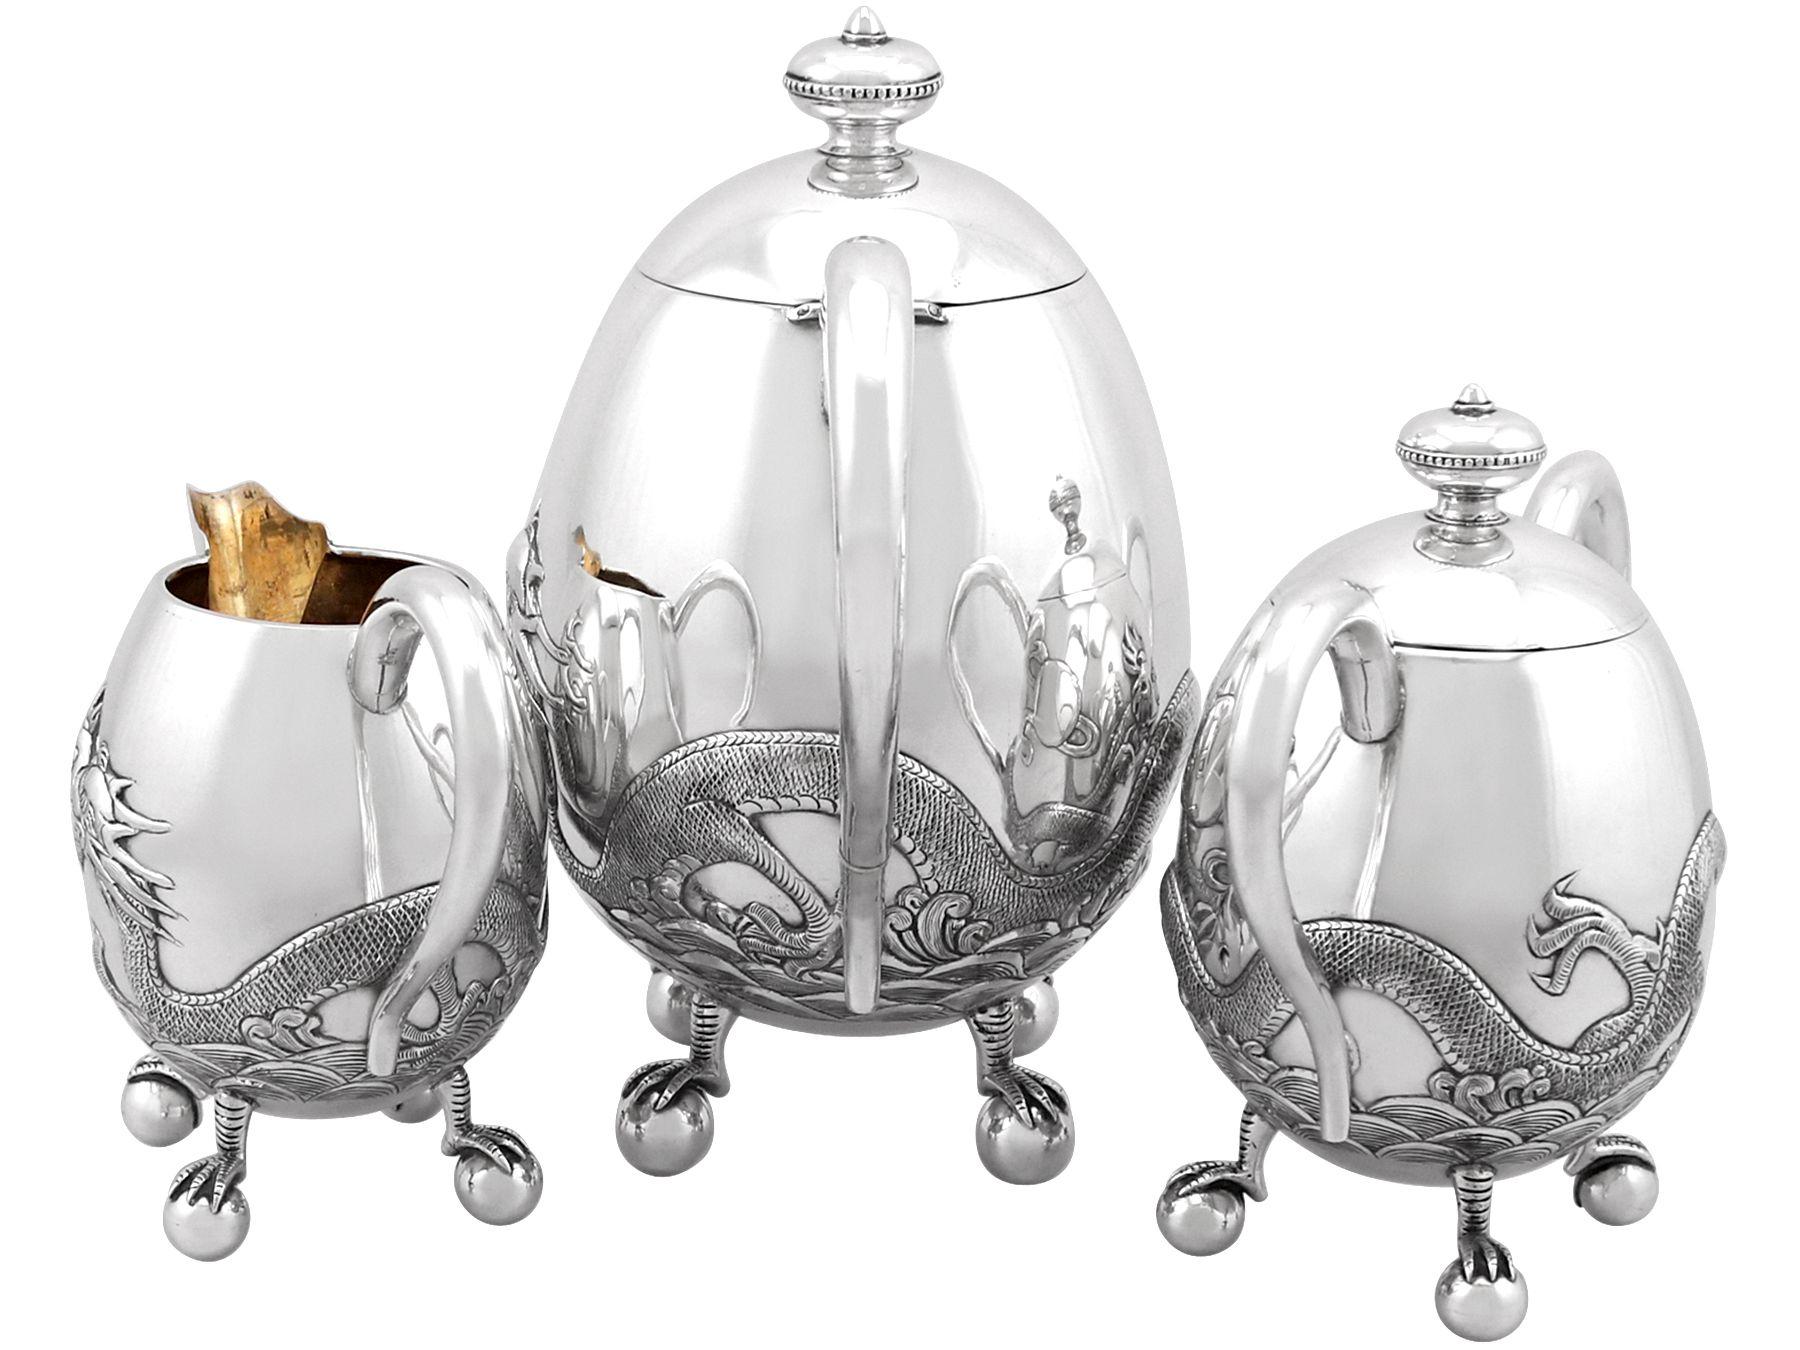 Chinese Export Silver Three Piece Tea Service - Antique Circa 1920

An exceptional, fine and impressive antique Chinese export silver three piece tea service; an addition to our diverse silver teaware collection

This exceptional antique Chinese